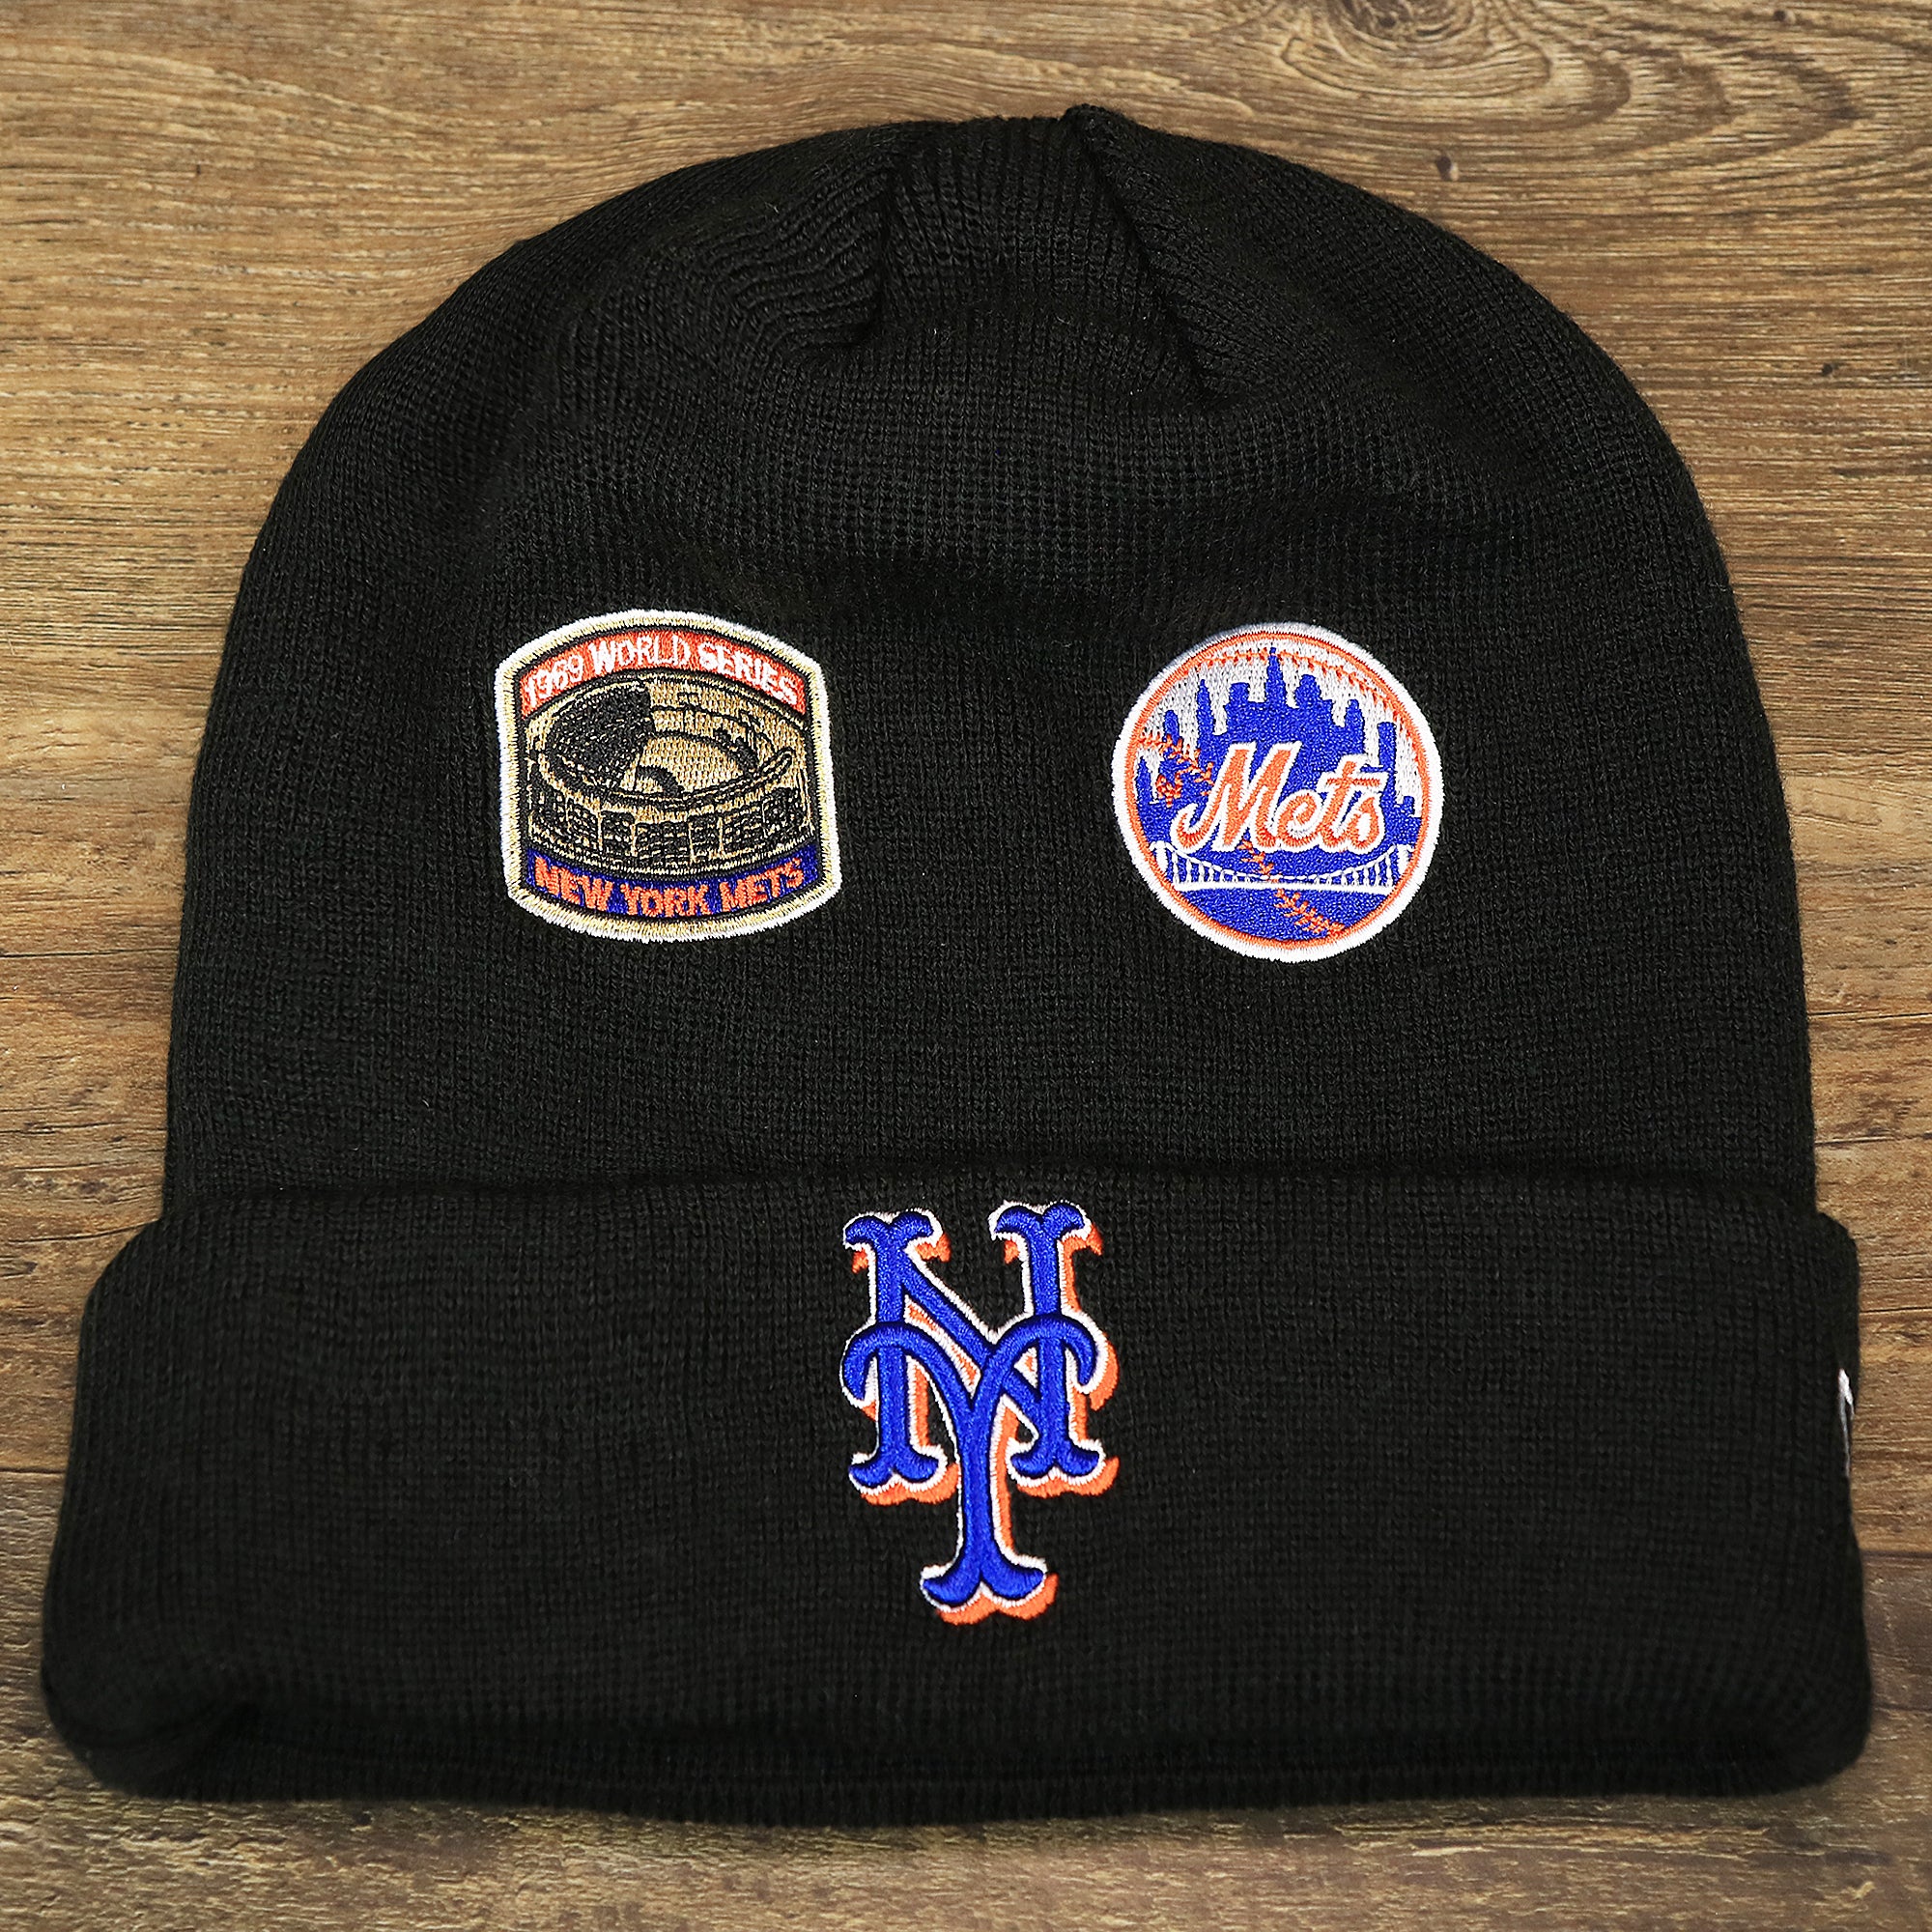 Cap Swag on X: Shop for the Retro NY Mets, 2000 world series grey